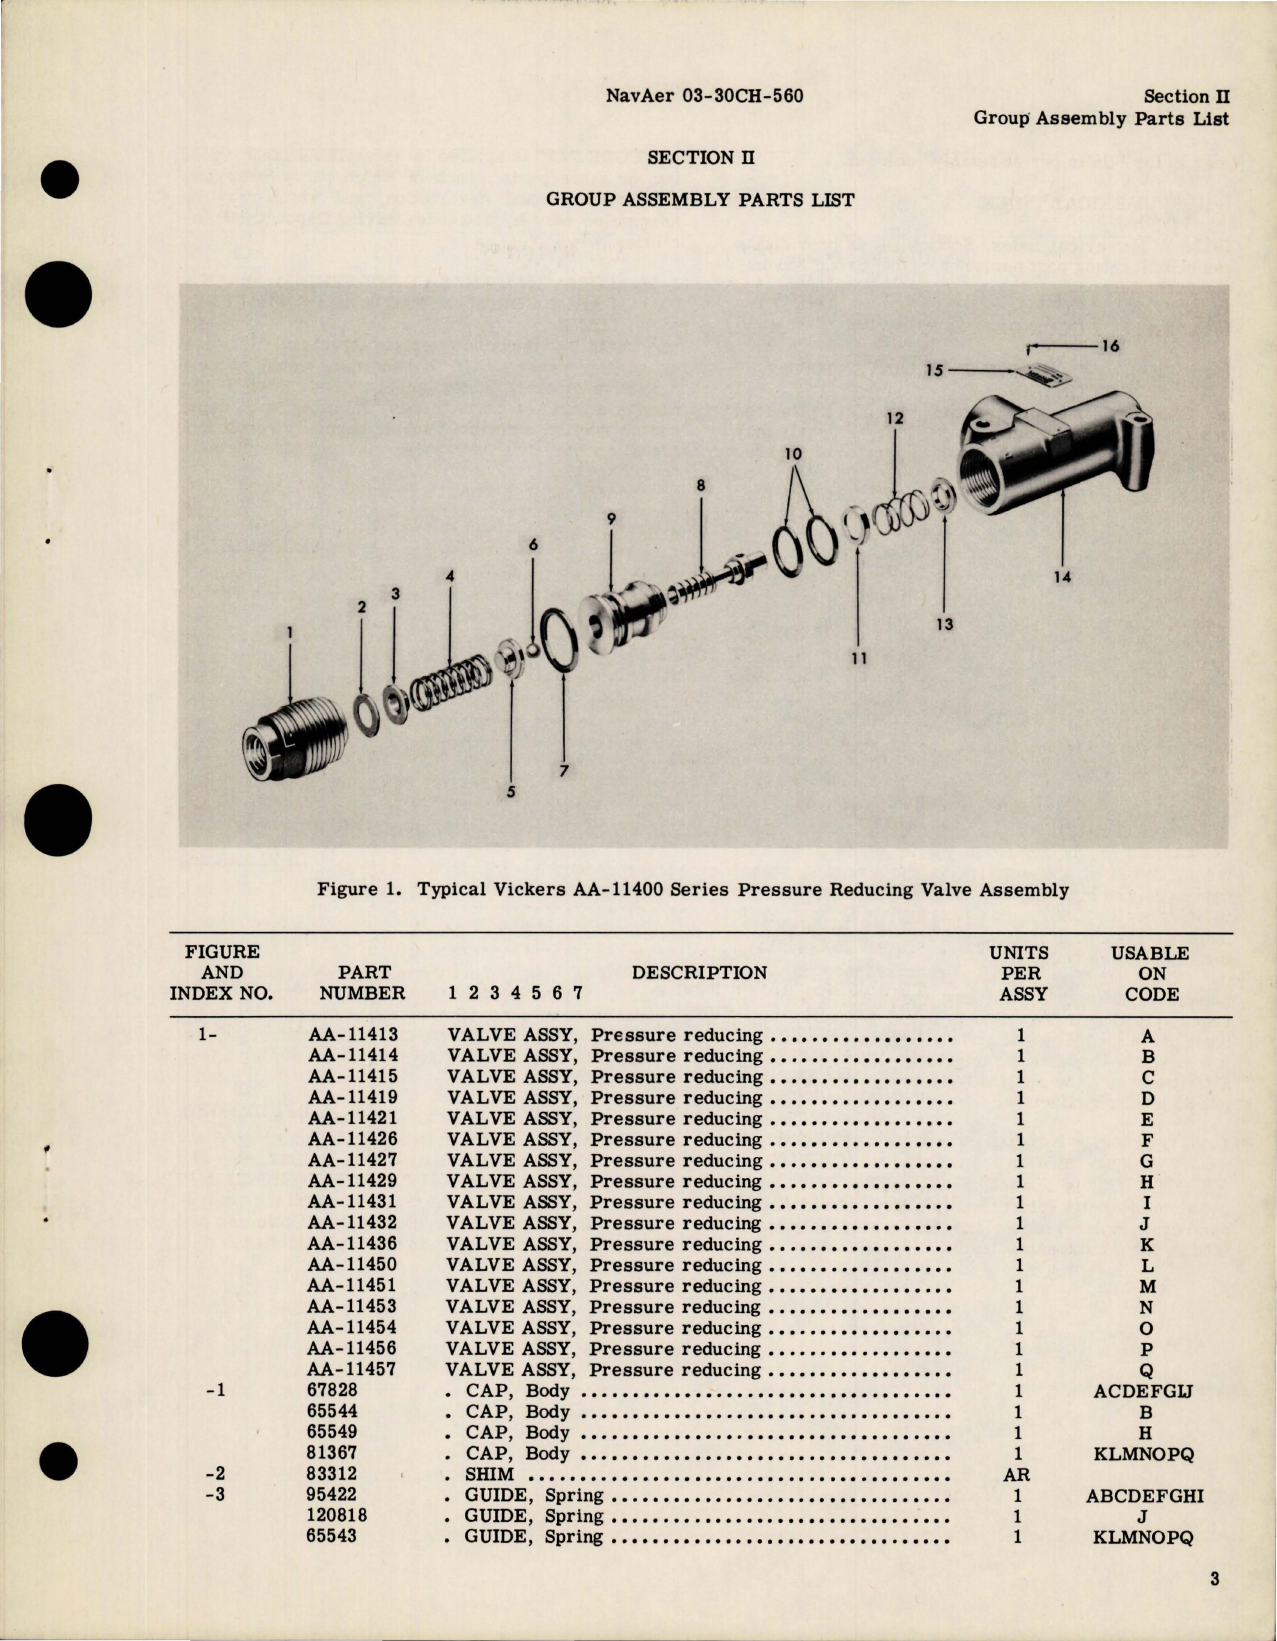 Sample page 5 from AirCorps Library document: Illustrated Parts Breakdown for Pressure Reducing Valve Assemblies - Model AA-114 Series